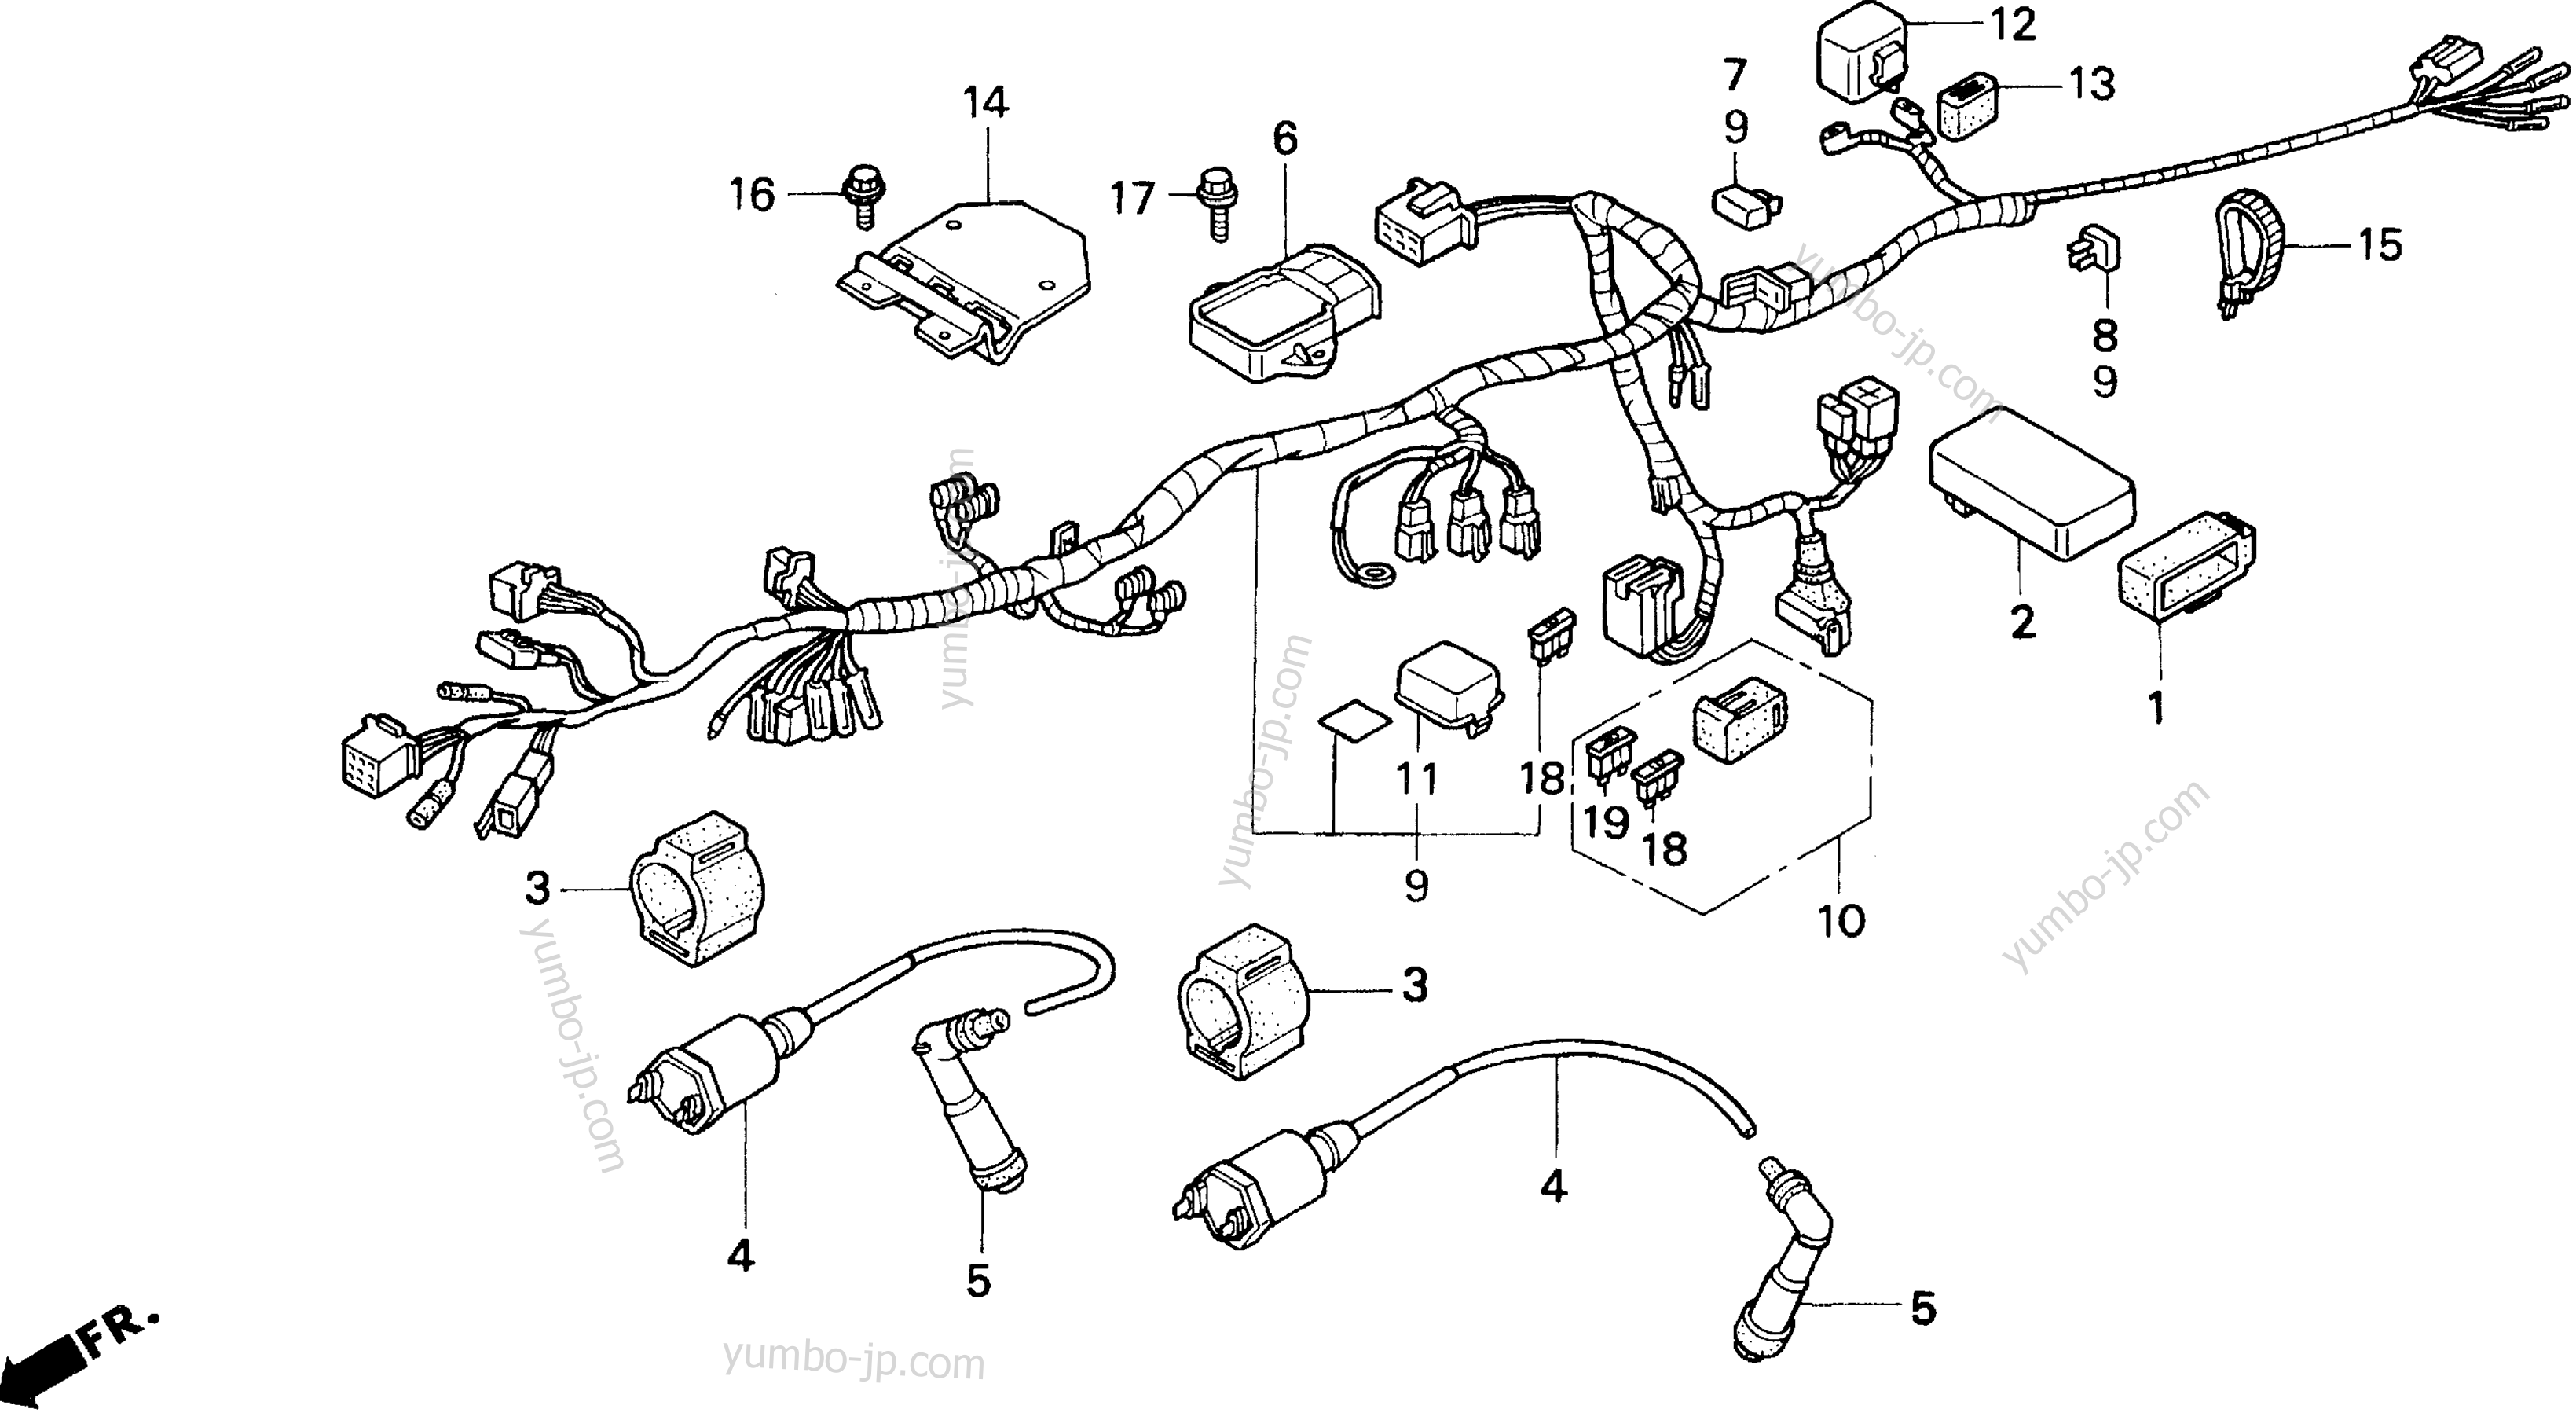 WIRE HARNESS for motorcycles HONDA CB250 AC 1991 year